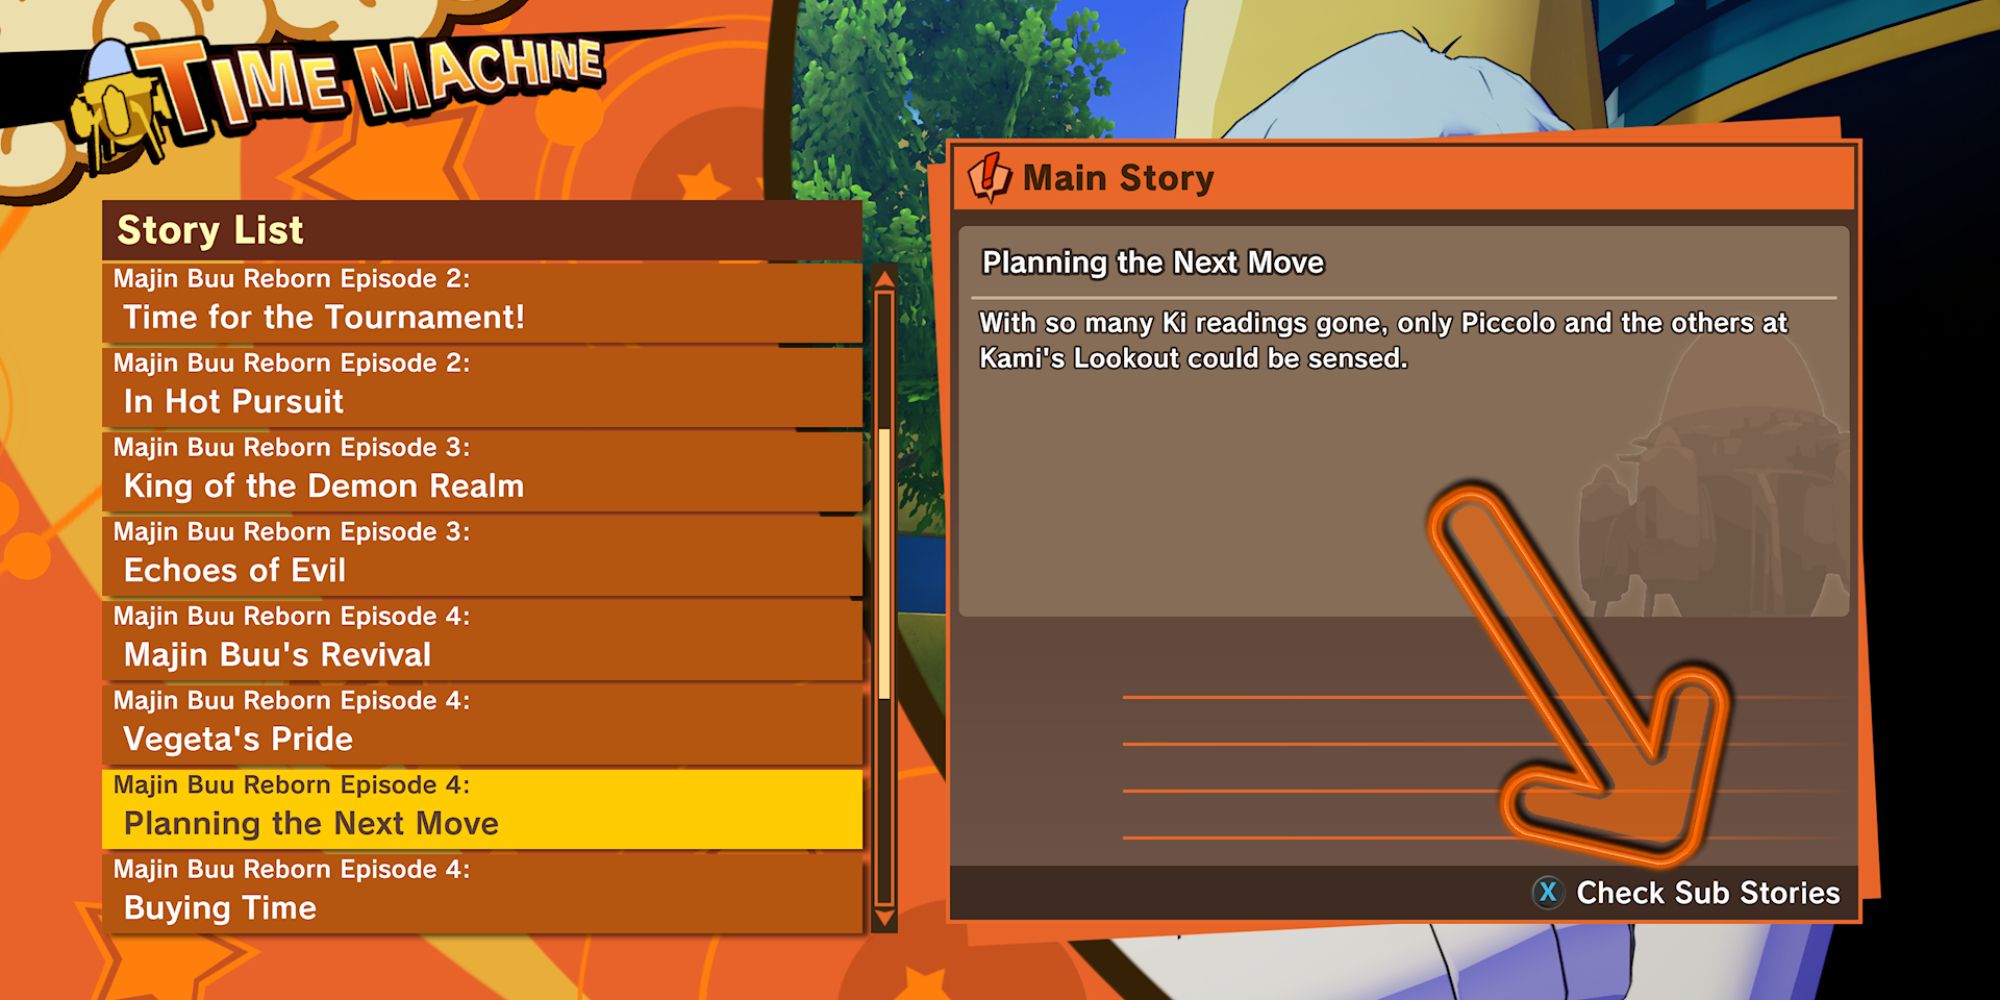 Dragon Ball Z Kakarot Screenshot Of Time Machine Story List With An Arrow Pointing At Check Sub Stories Button